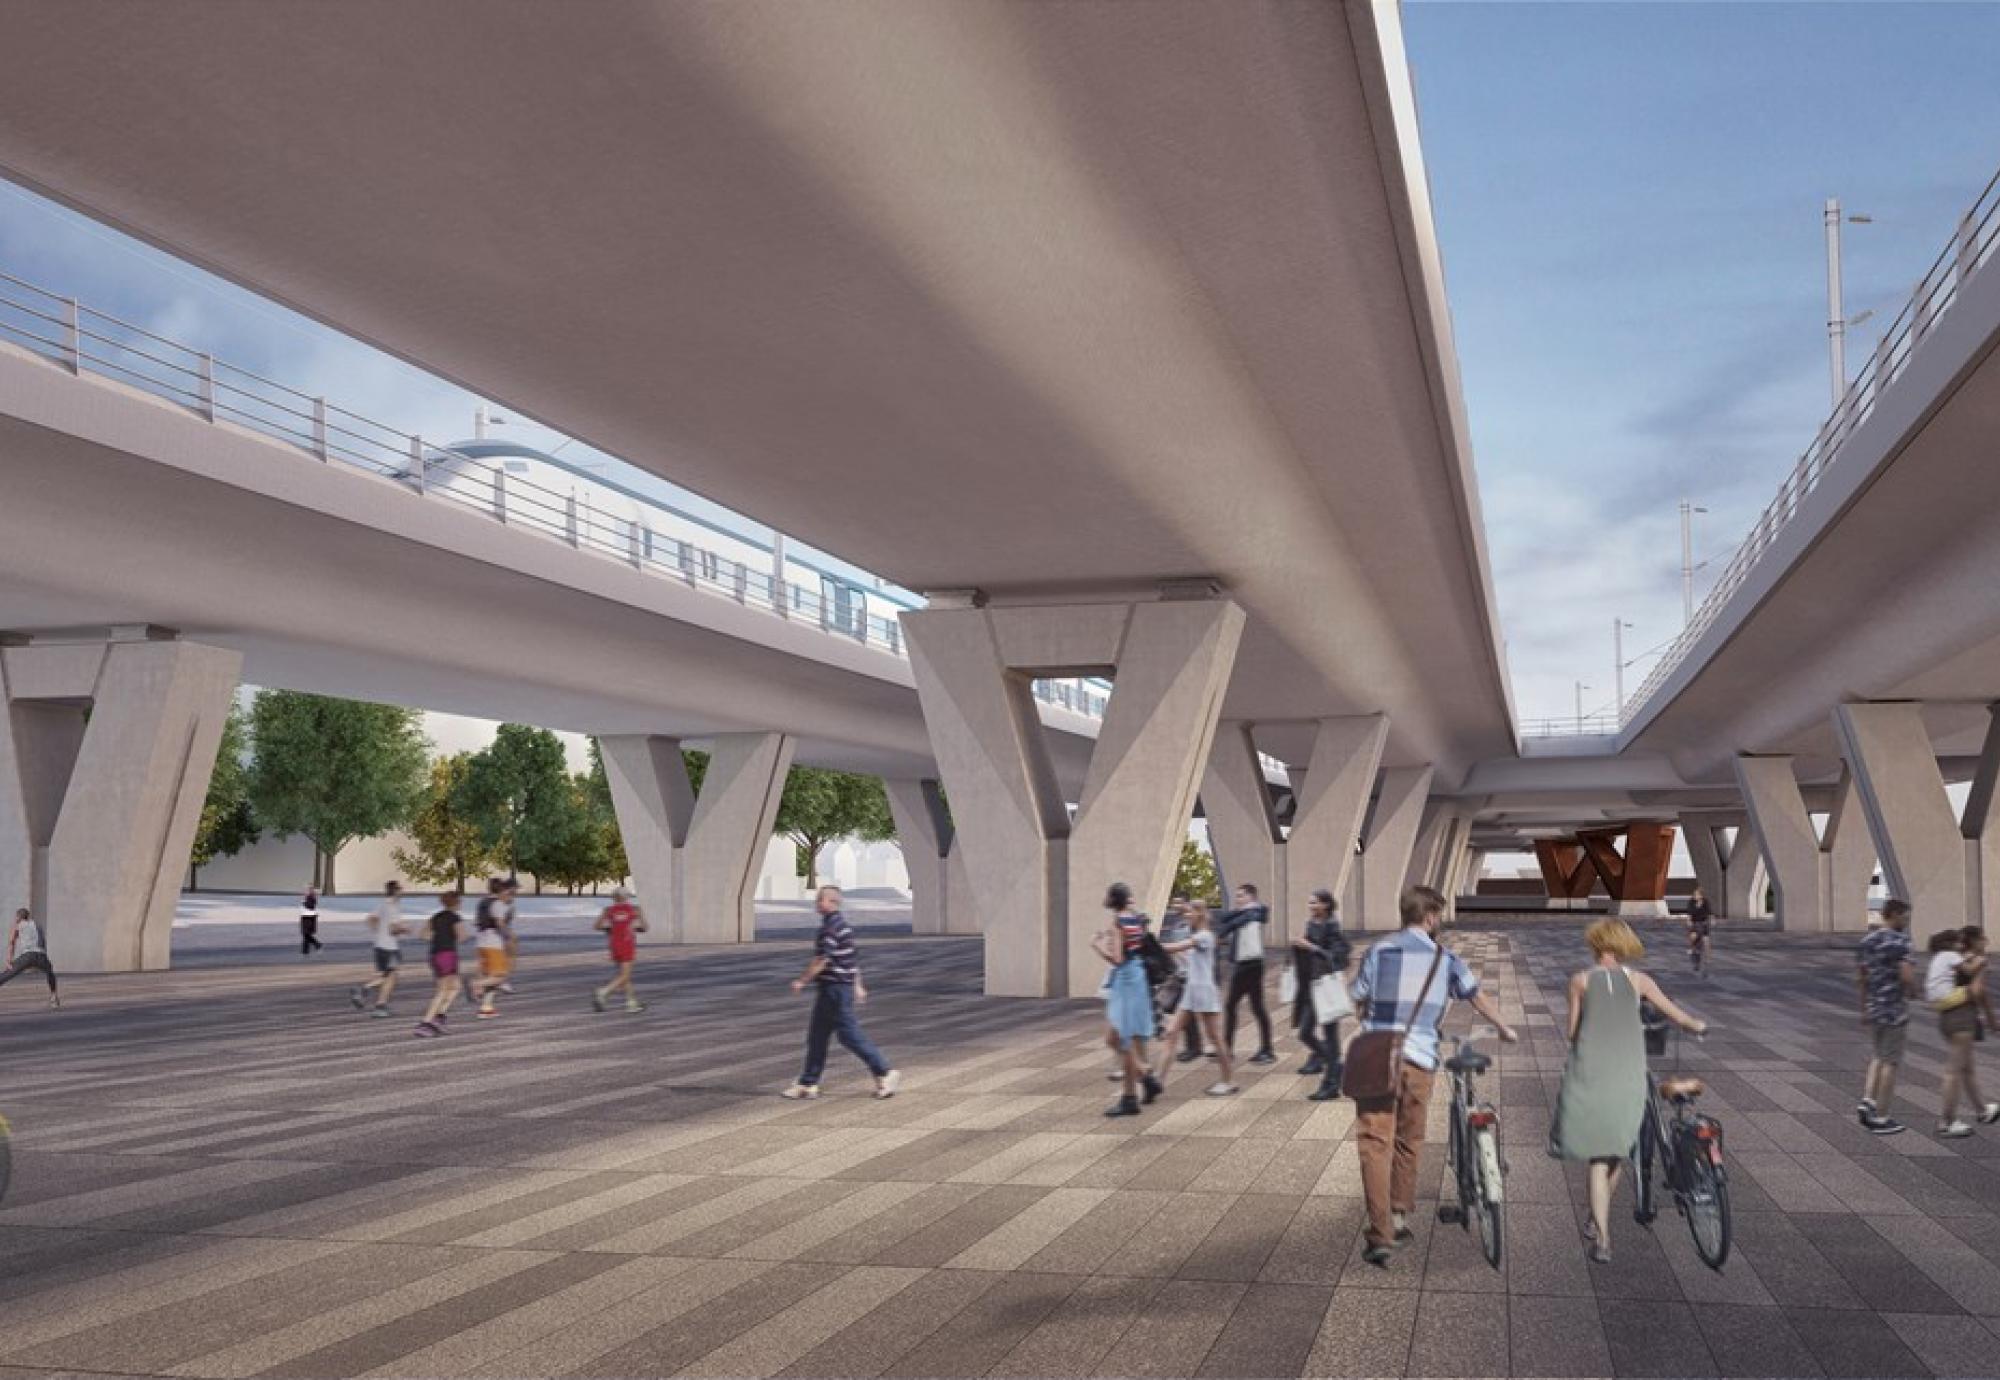 Image of the potential viaduct via HS2 